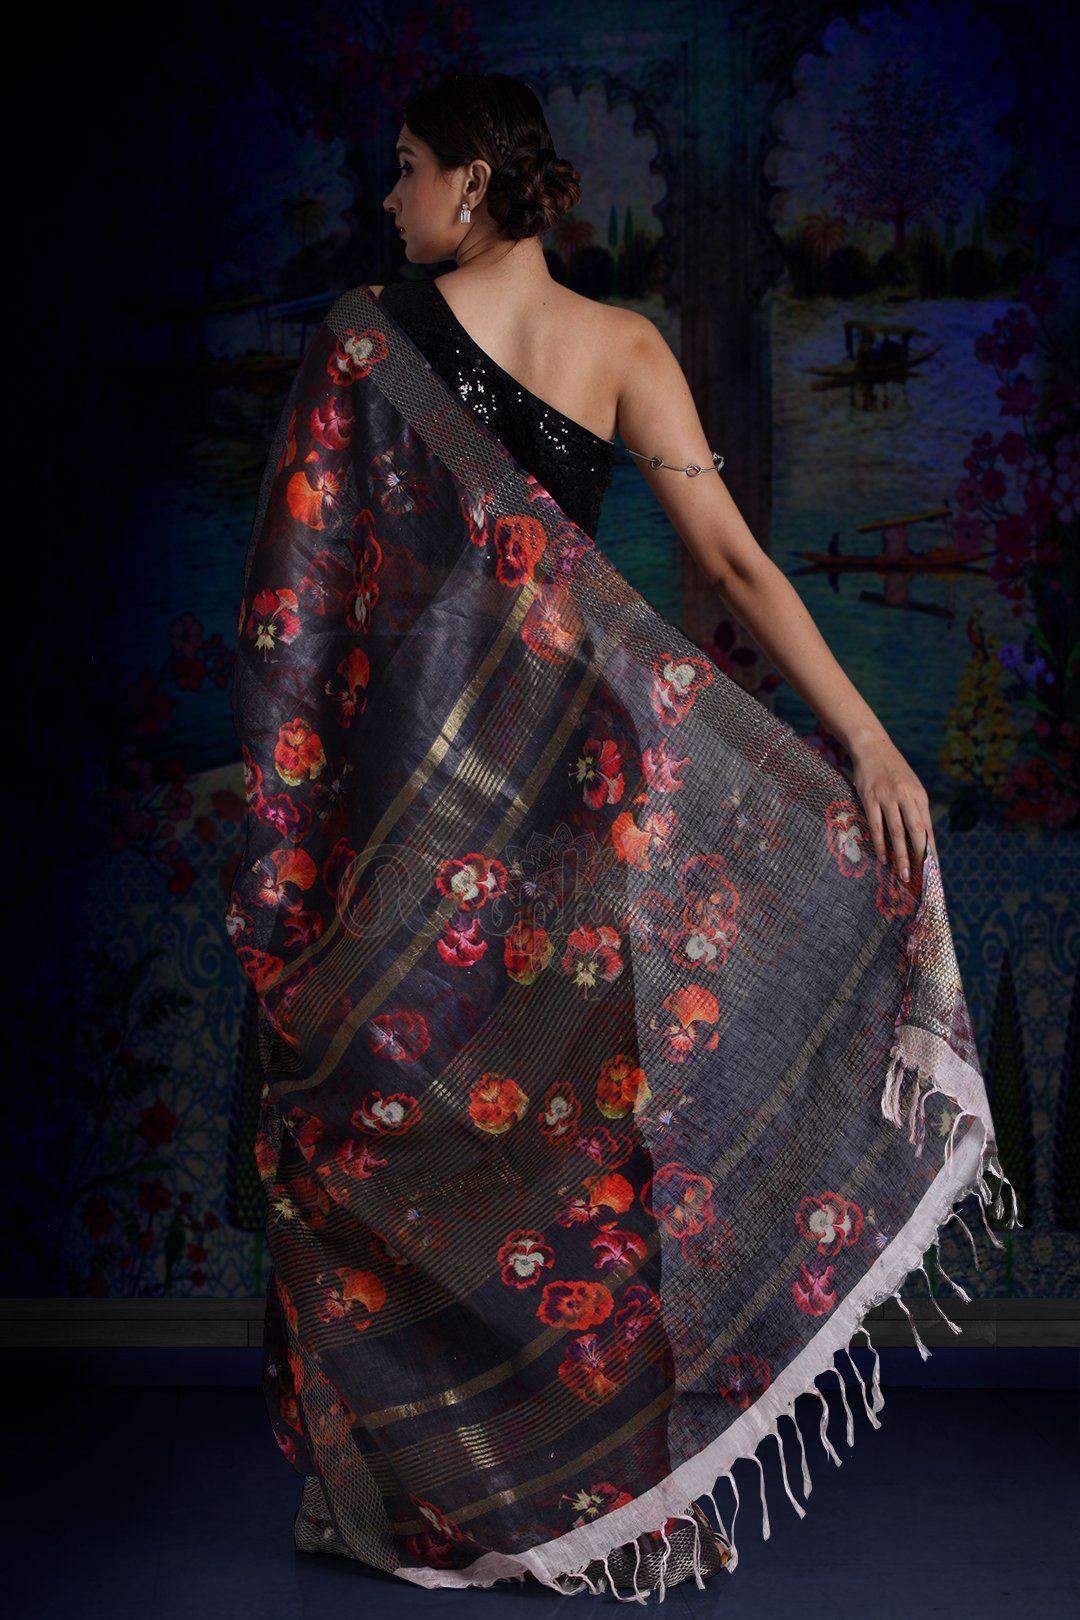 Charcoal Digital Printed Linen Saree With Zari Border & Pallu Earthen Collection Roopkatha - A Story of Art 